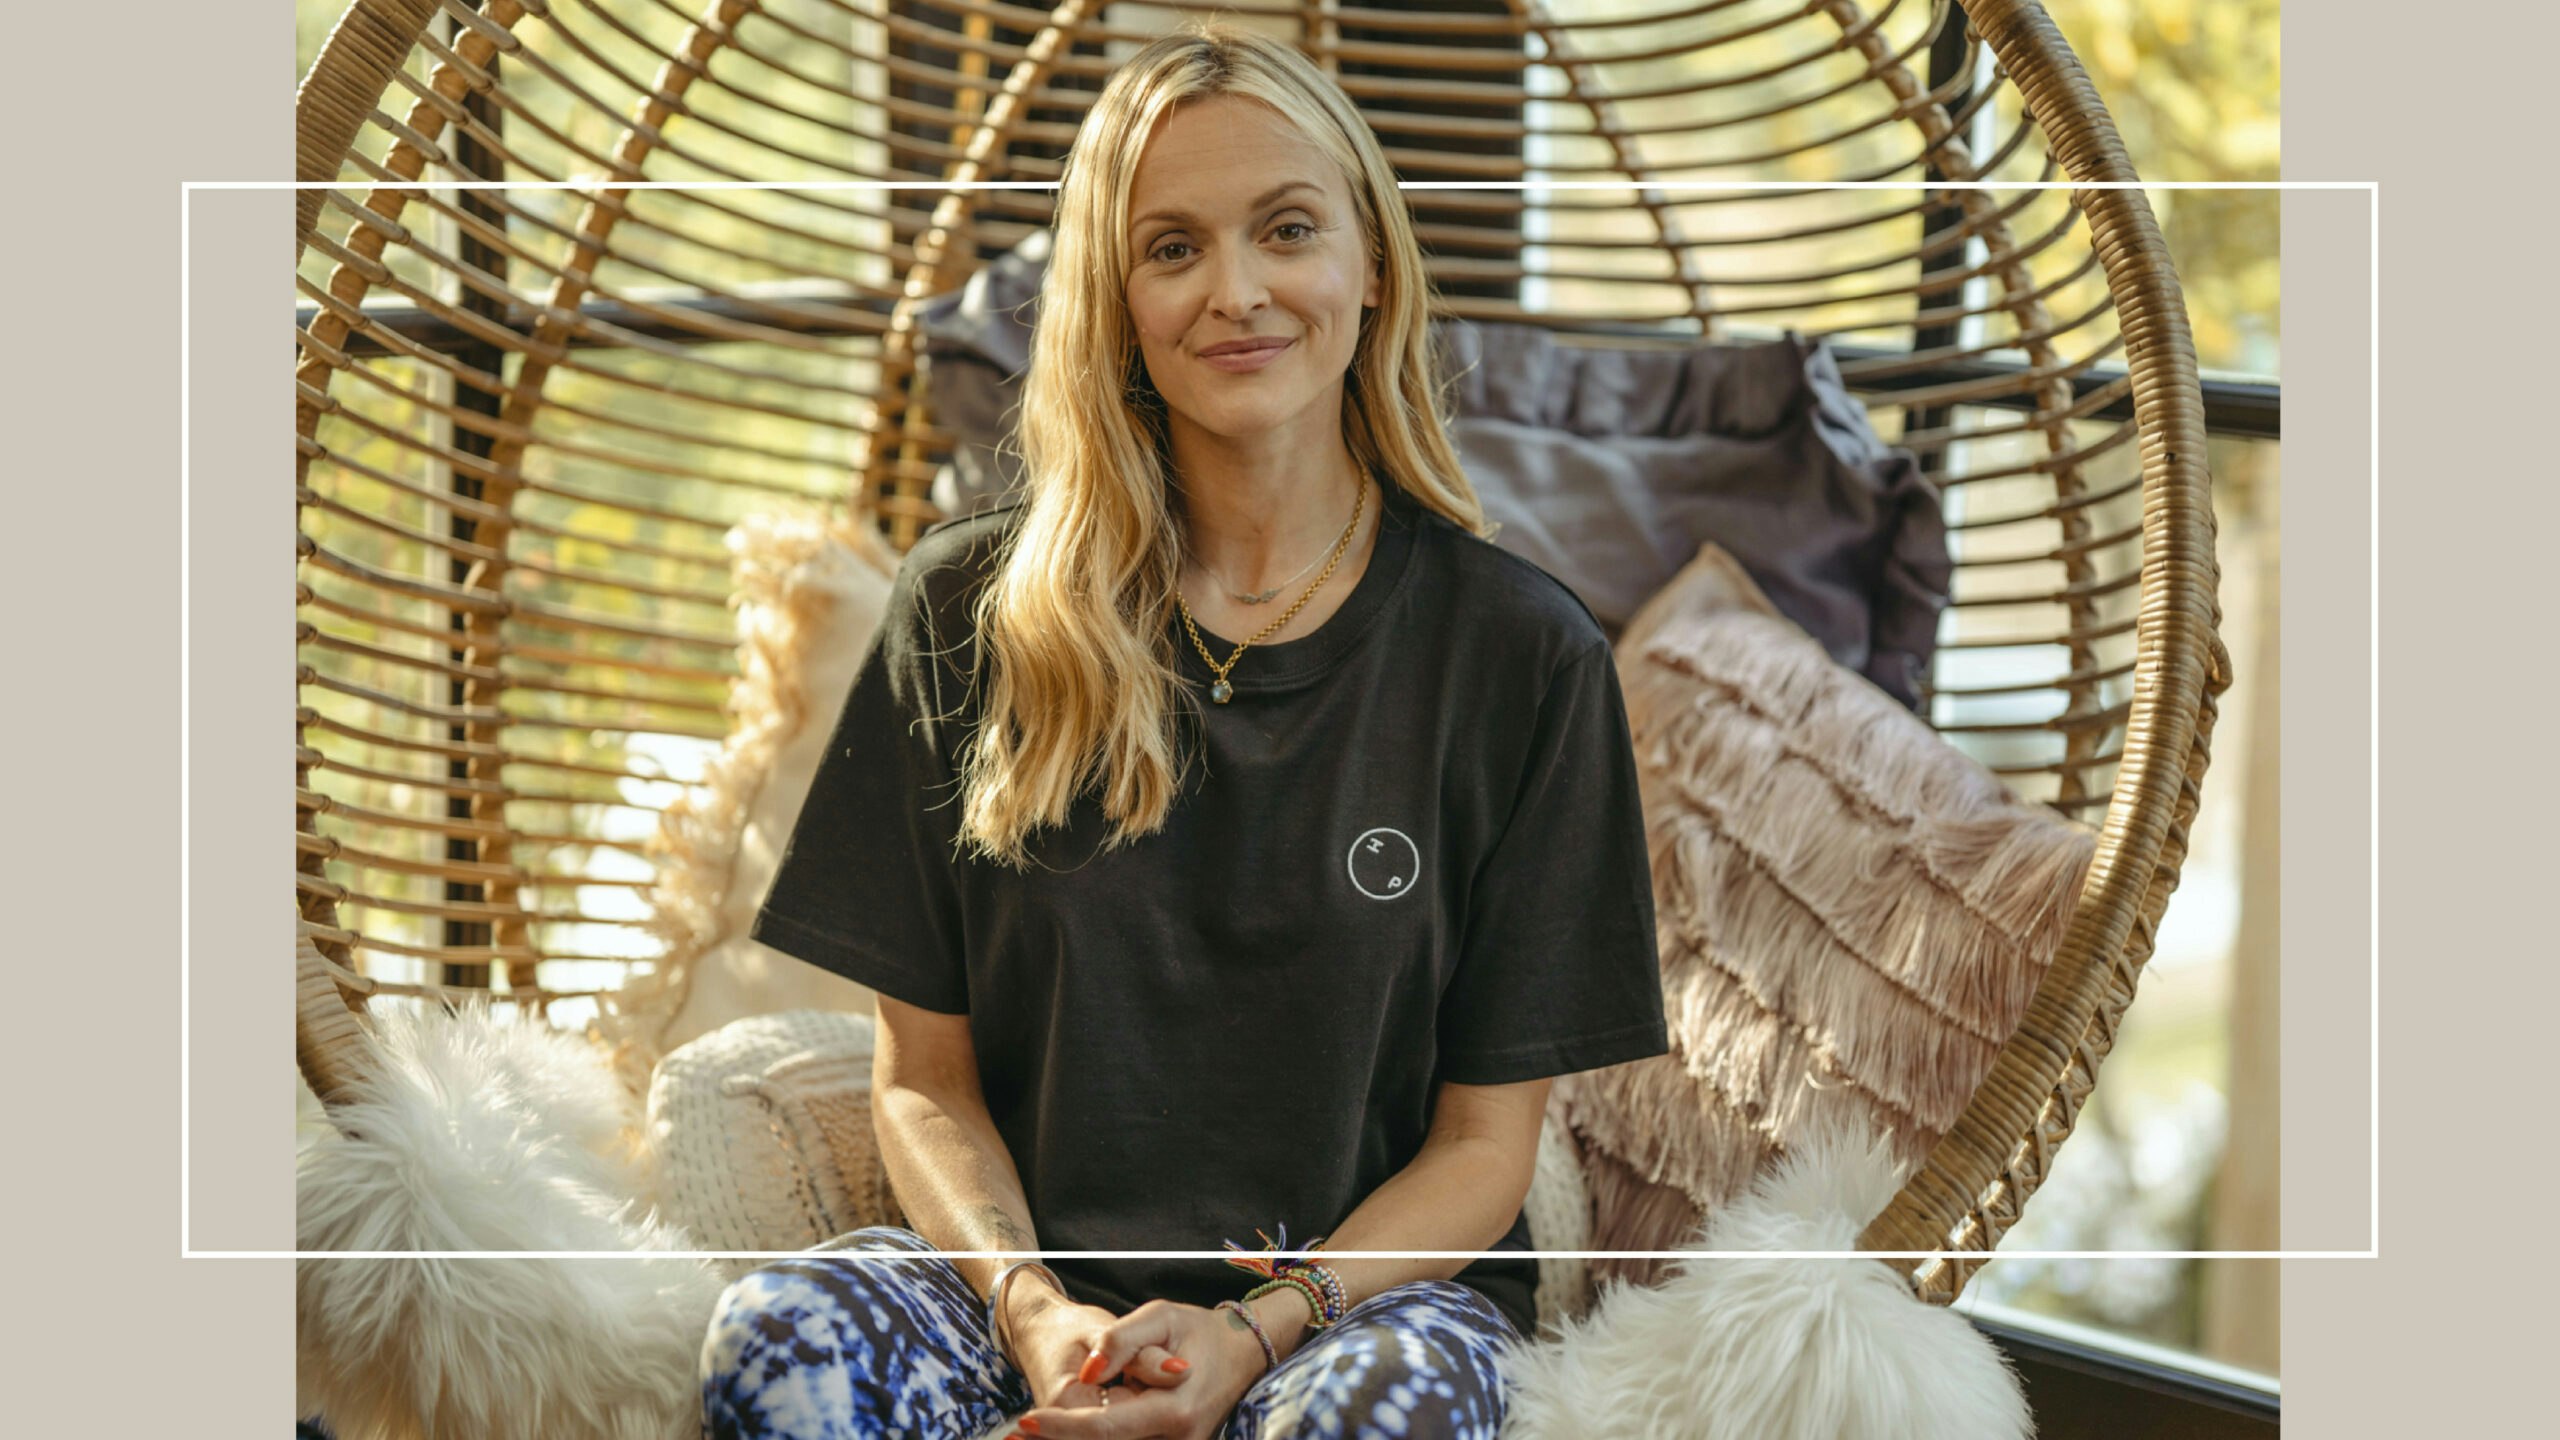 I tried Fearne Cotton's yoga routine and I've never felt so relaxed